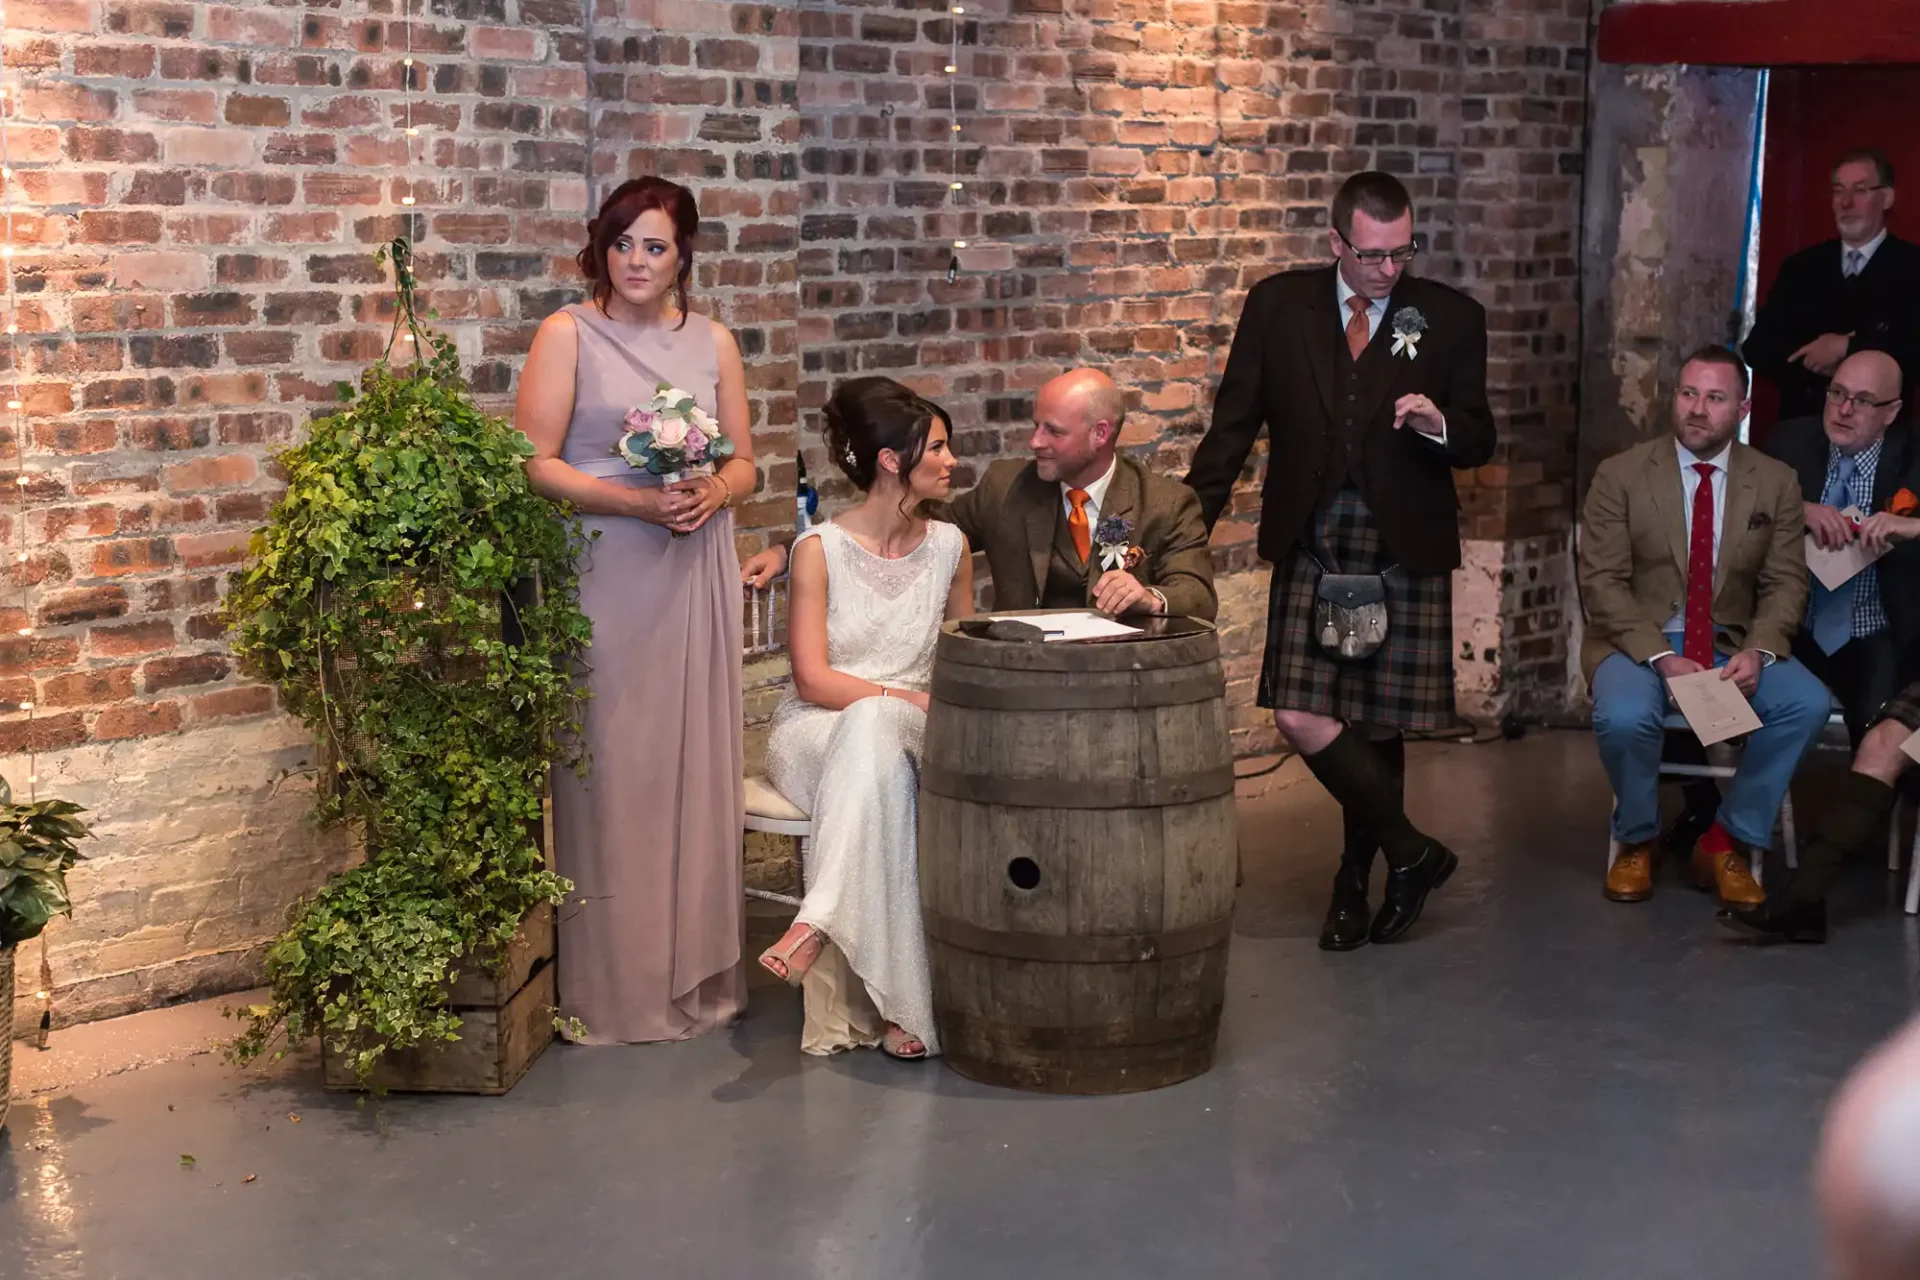 A wedding ceremony in a rustic venue with exposed brick walls, featuring a bride and groom seated by a wooden barrel, a bridesmaid standing nearby, and guests in varied attire watching.